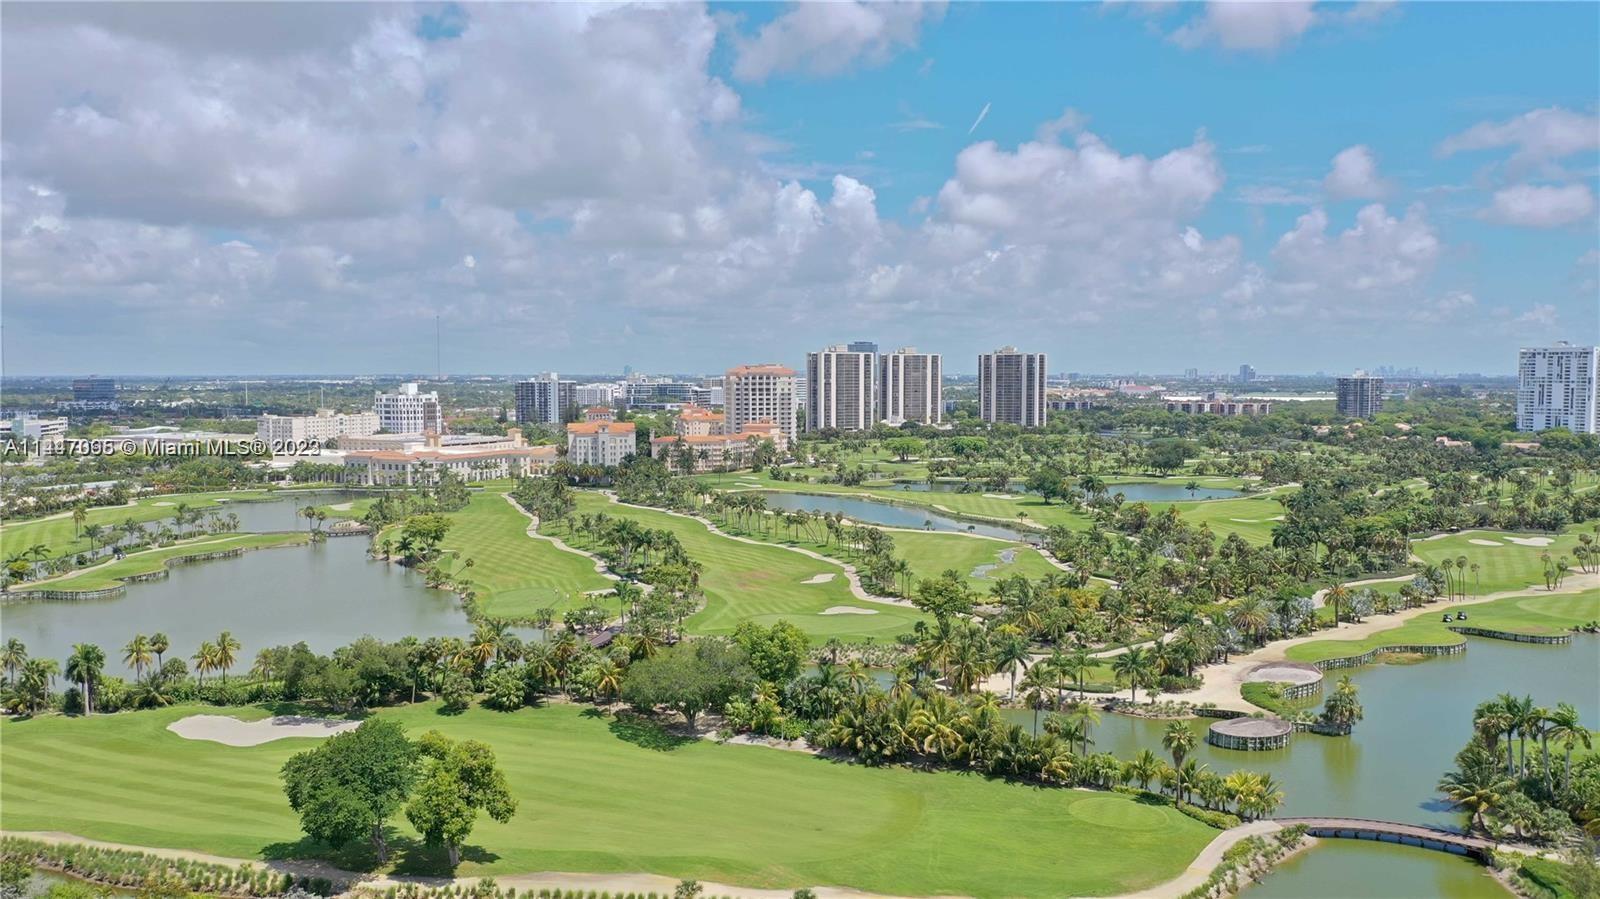 Best price special condo in the heart of Aventura, Mystic Pointe Tower 600, 2 Bed/2 baths, wiht Gold